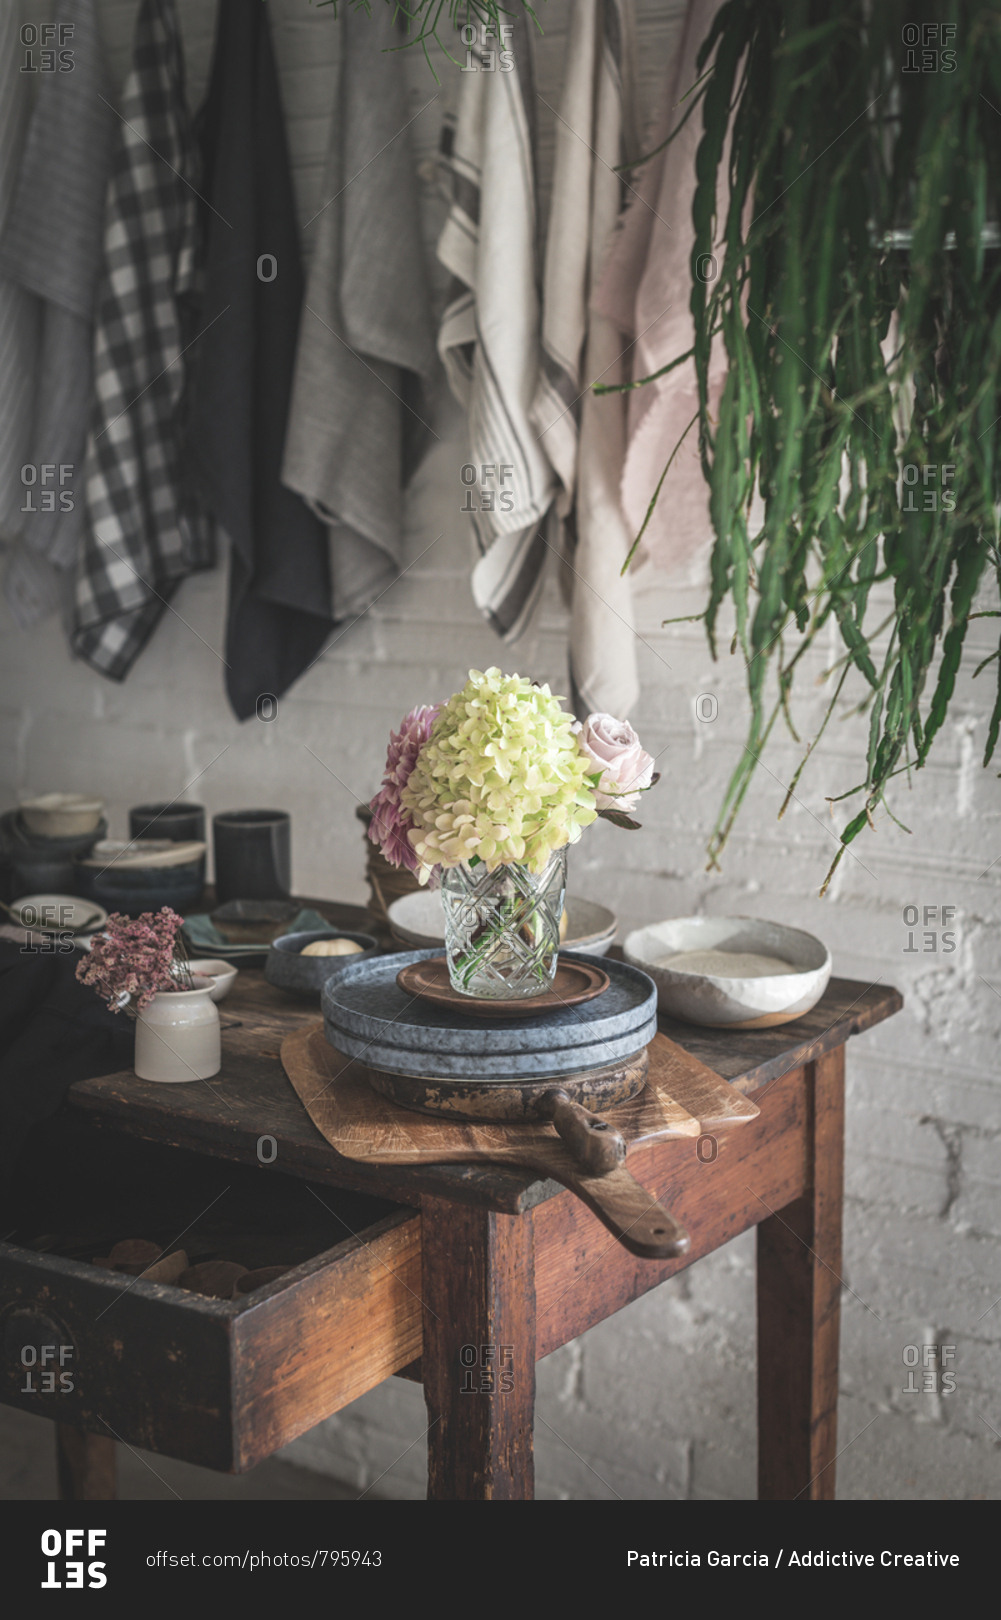 Wooden table with bunch of fresh pink chrysanthemums and white hydrangea in vase between frying pan and kitchenware near dish cloths hanging on twist with pins